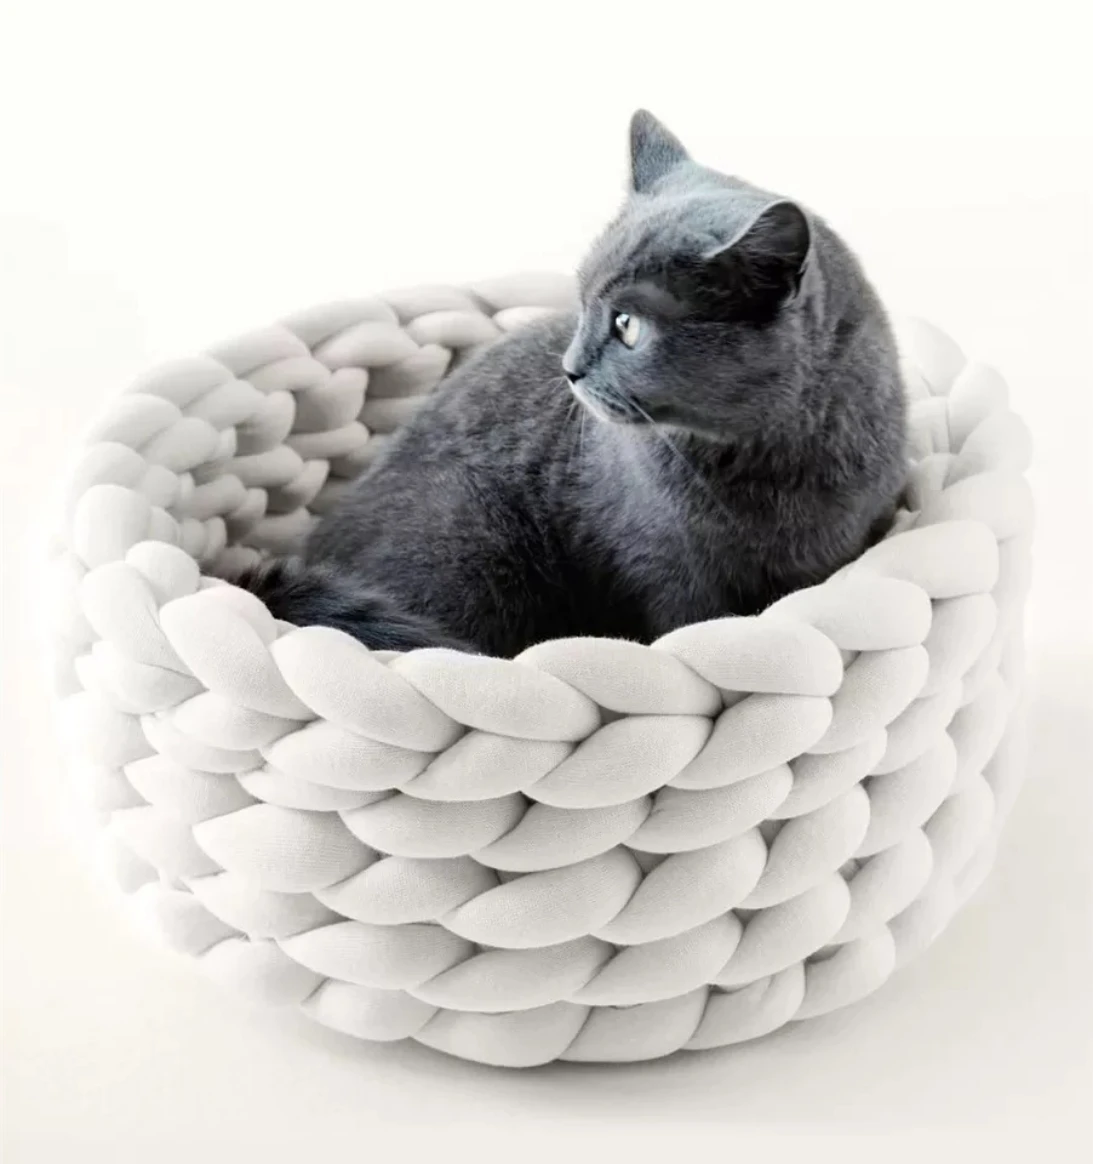 

Warm Washable Foldable Soft Arm Hand Knitting DIY Handmade Pet Bed Chunky Cotton Yarn tube Cat Dog Bed Sleep Woven indoor, Red, white, yello, blue, brown